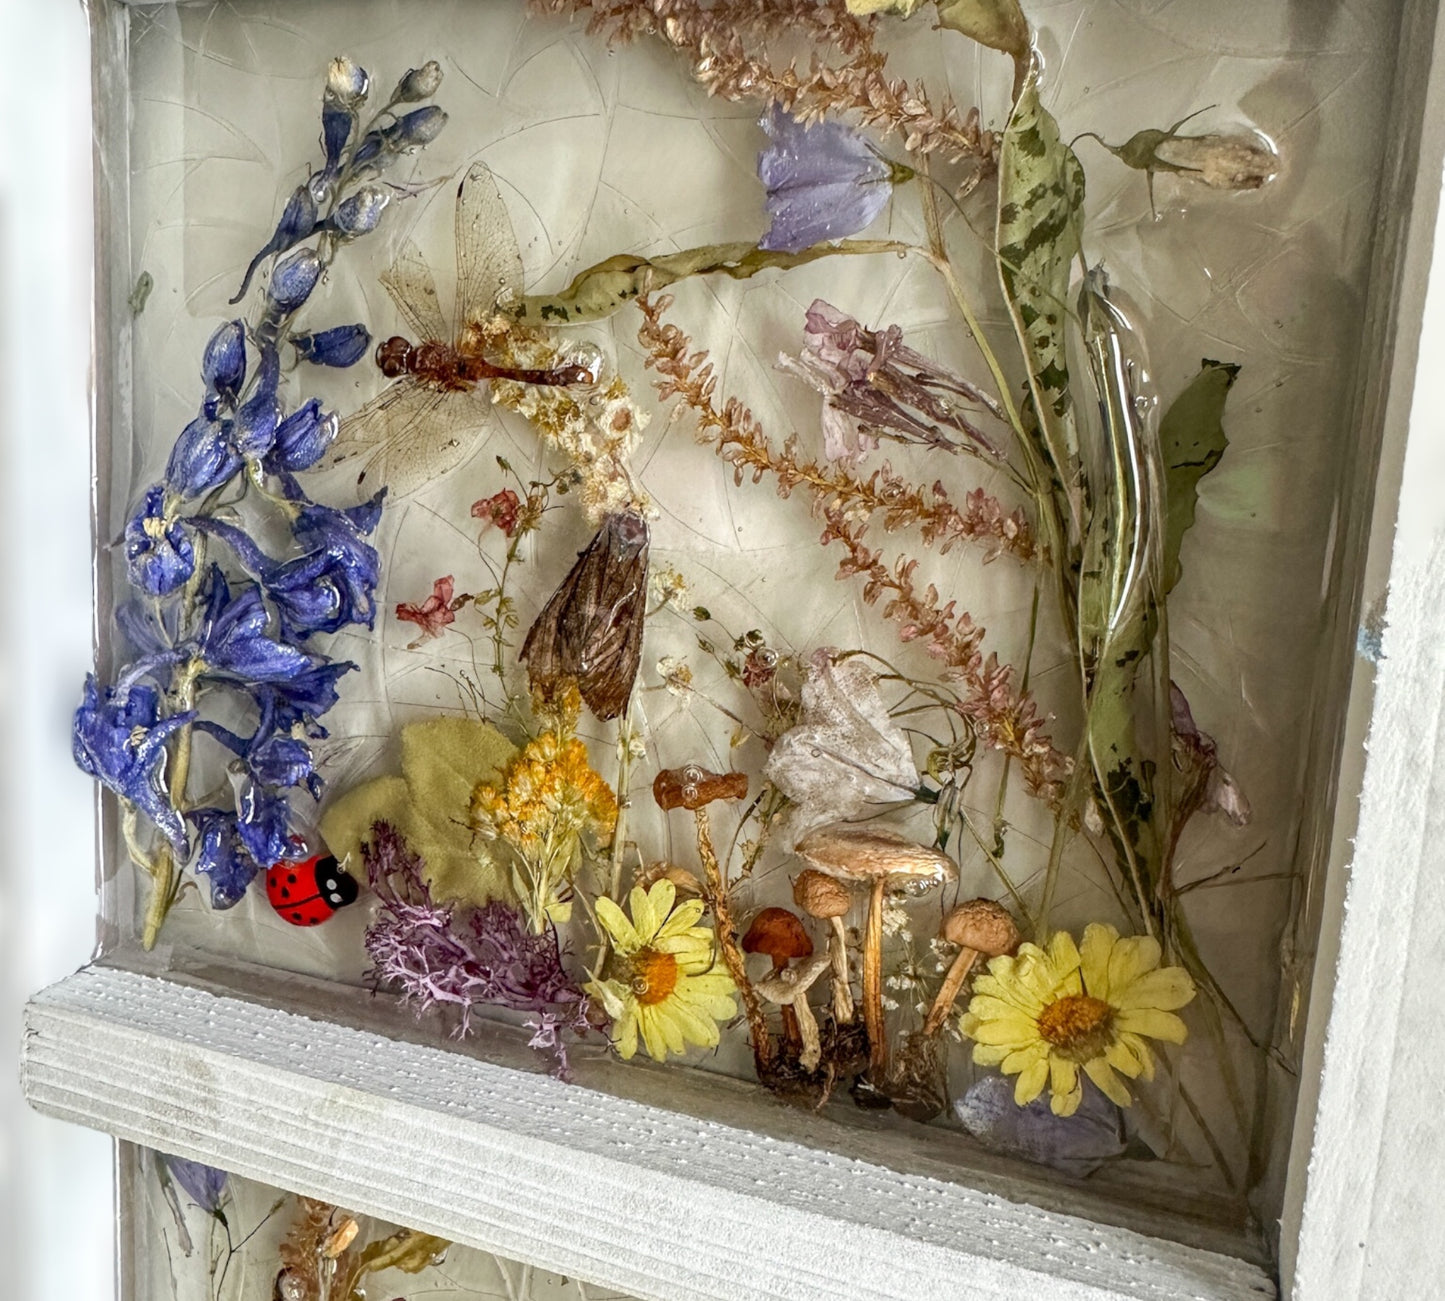 Garden Window Insipired by Nature - Pressed Flower and Botanical Decor